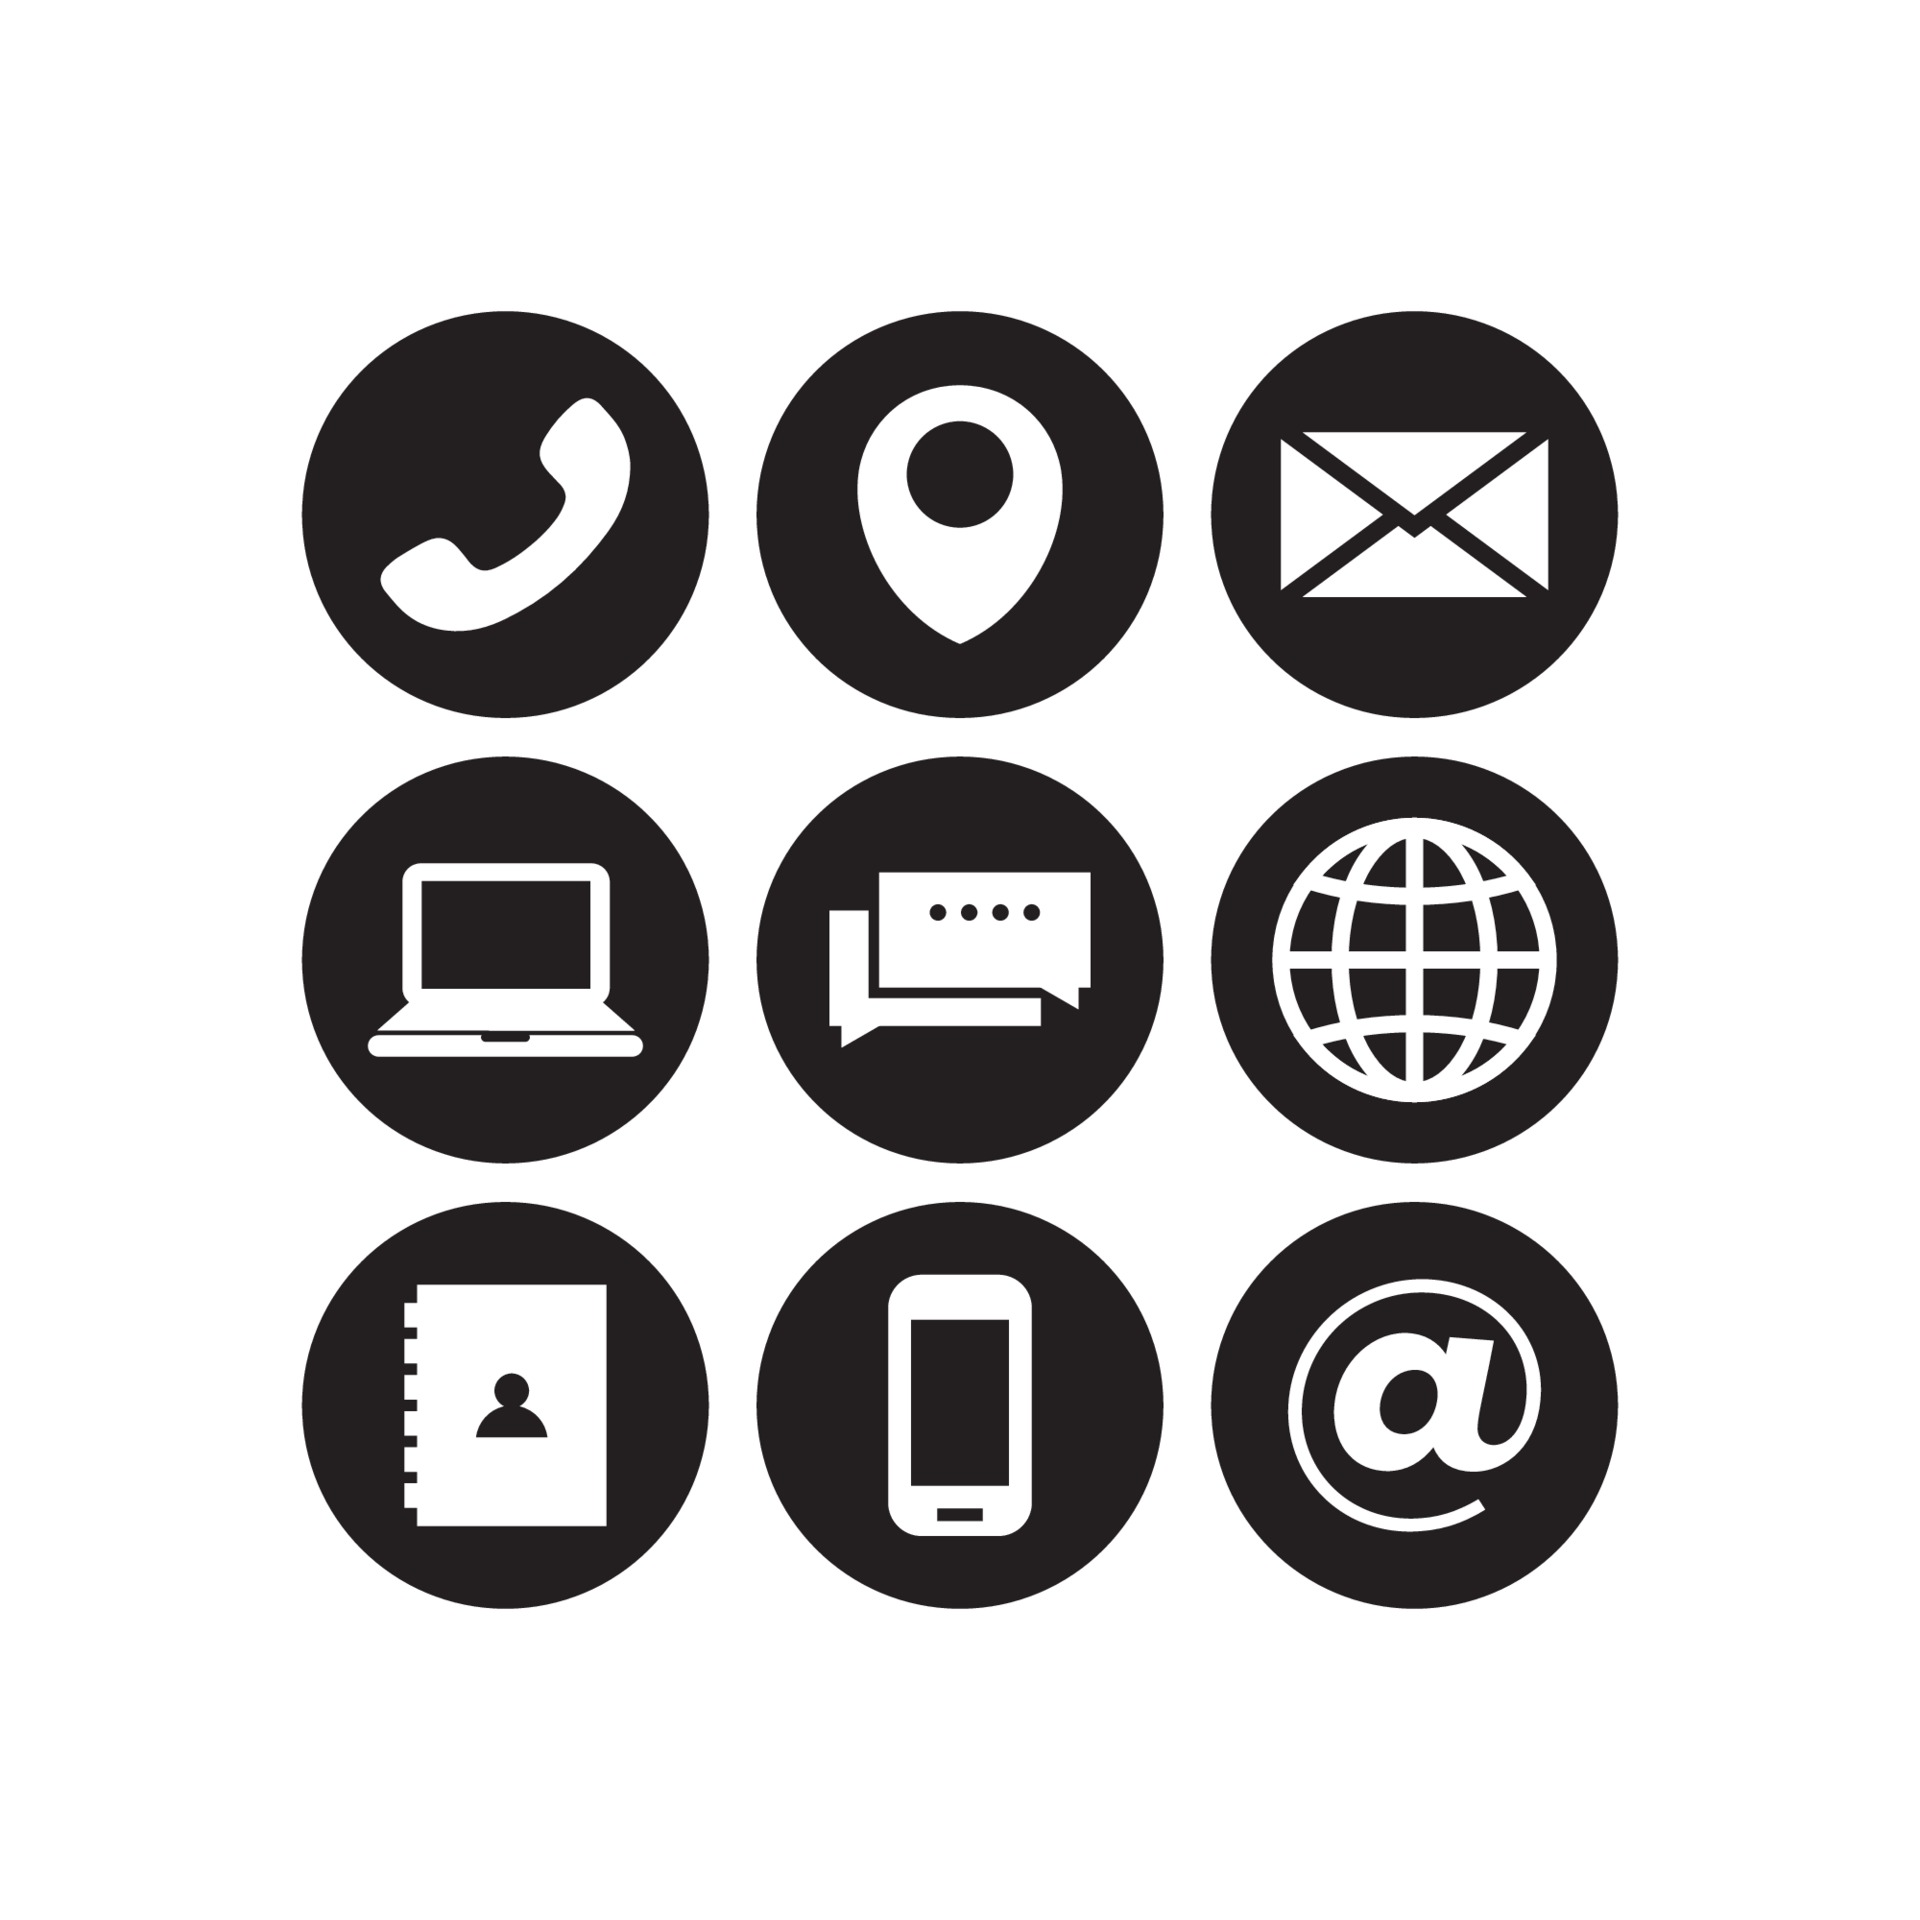 contact-us-icons-vector-art-icons-and-graphics-for-free-download